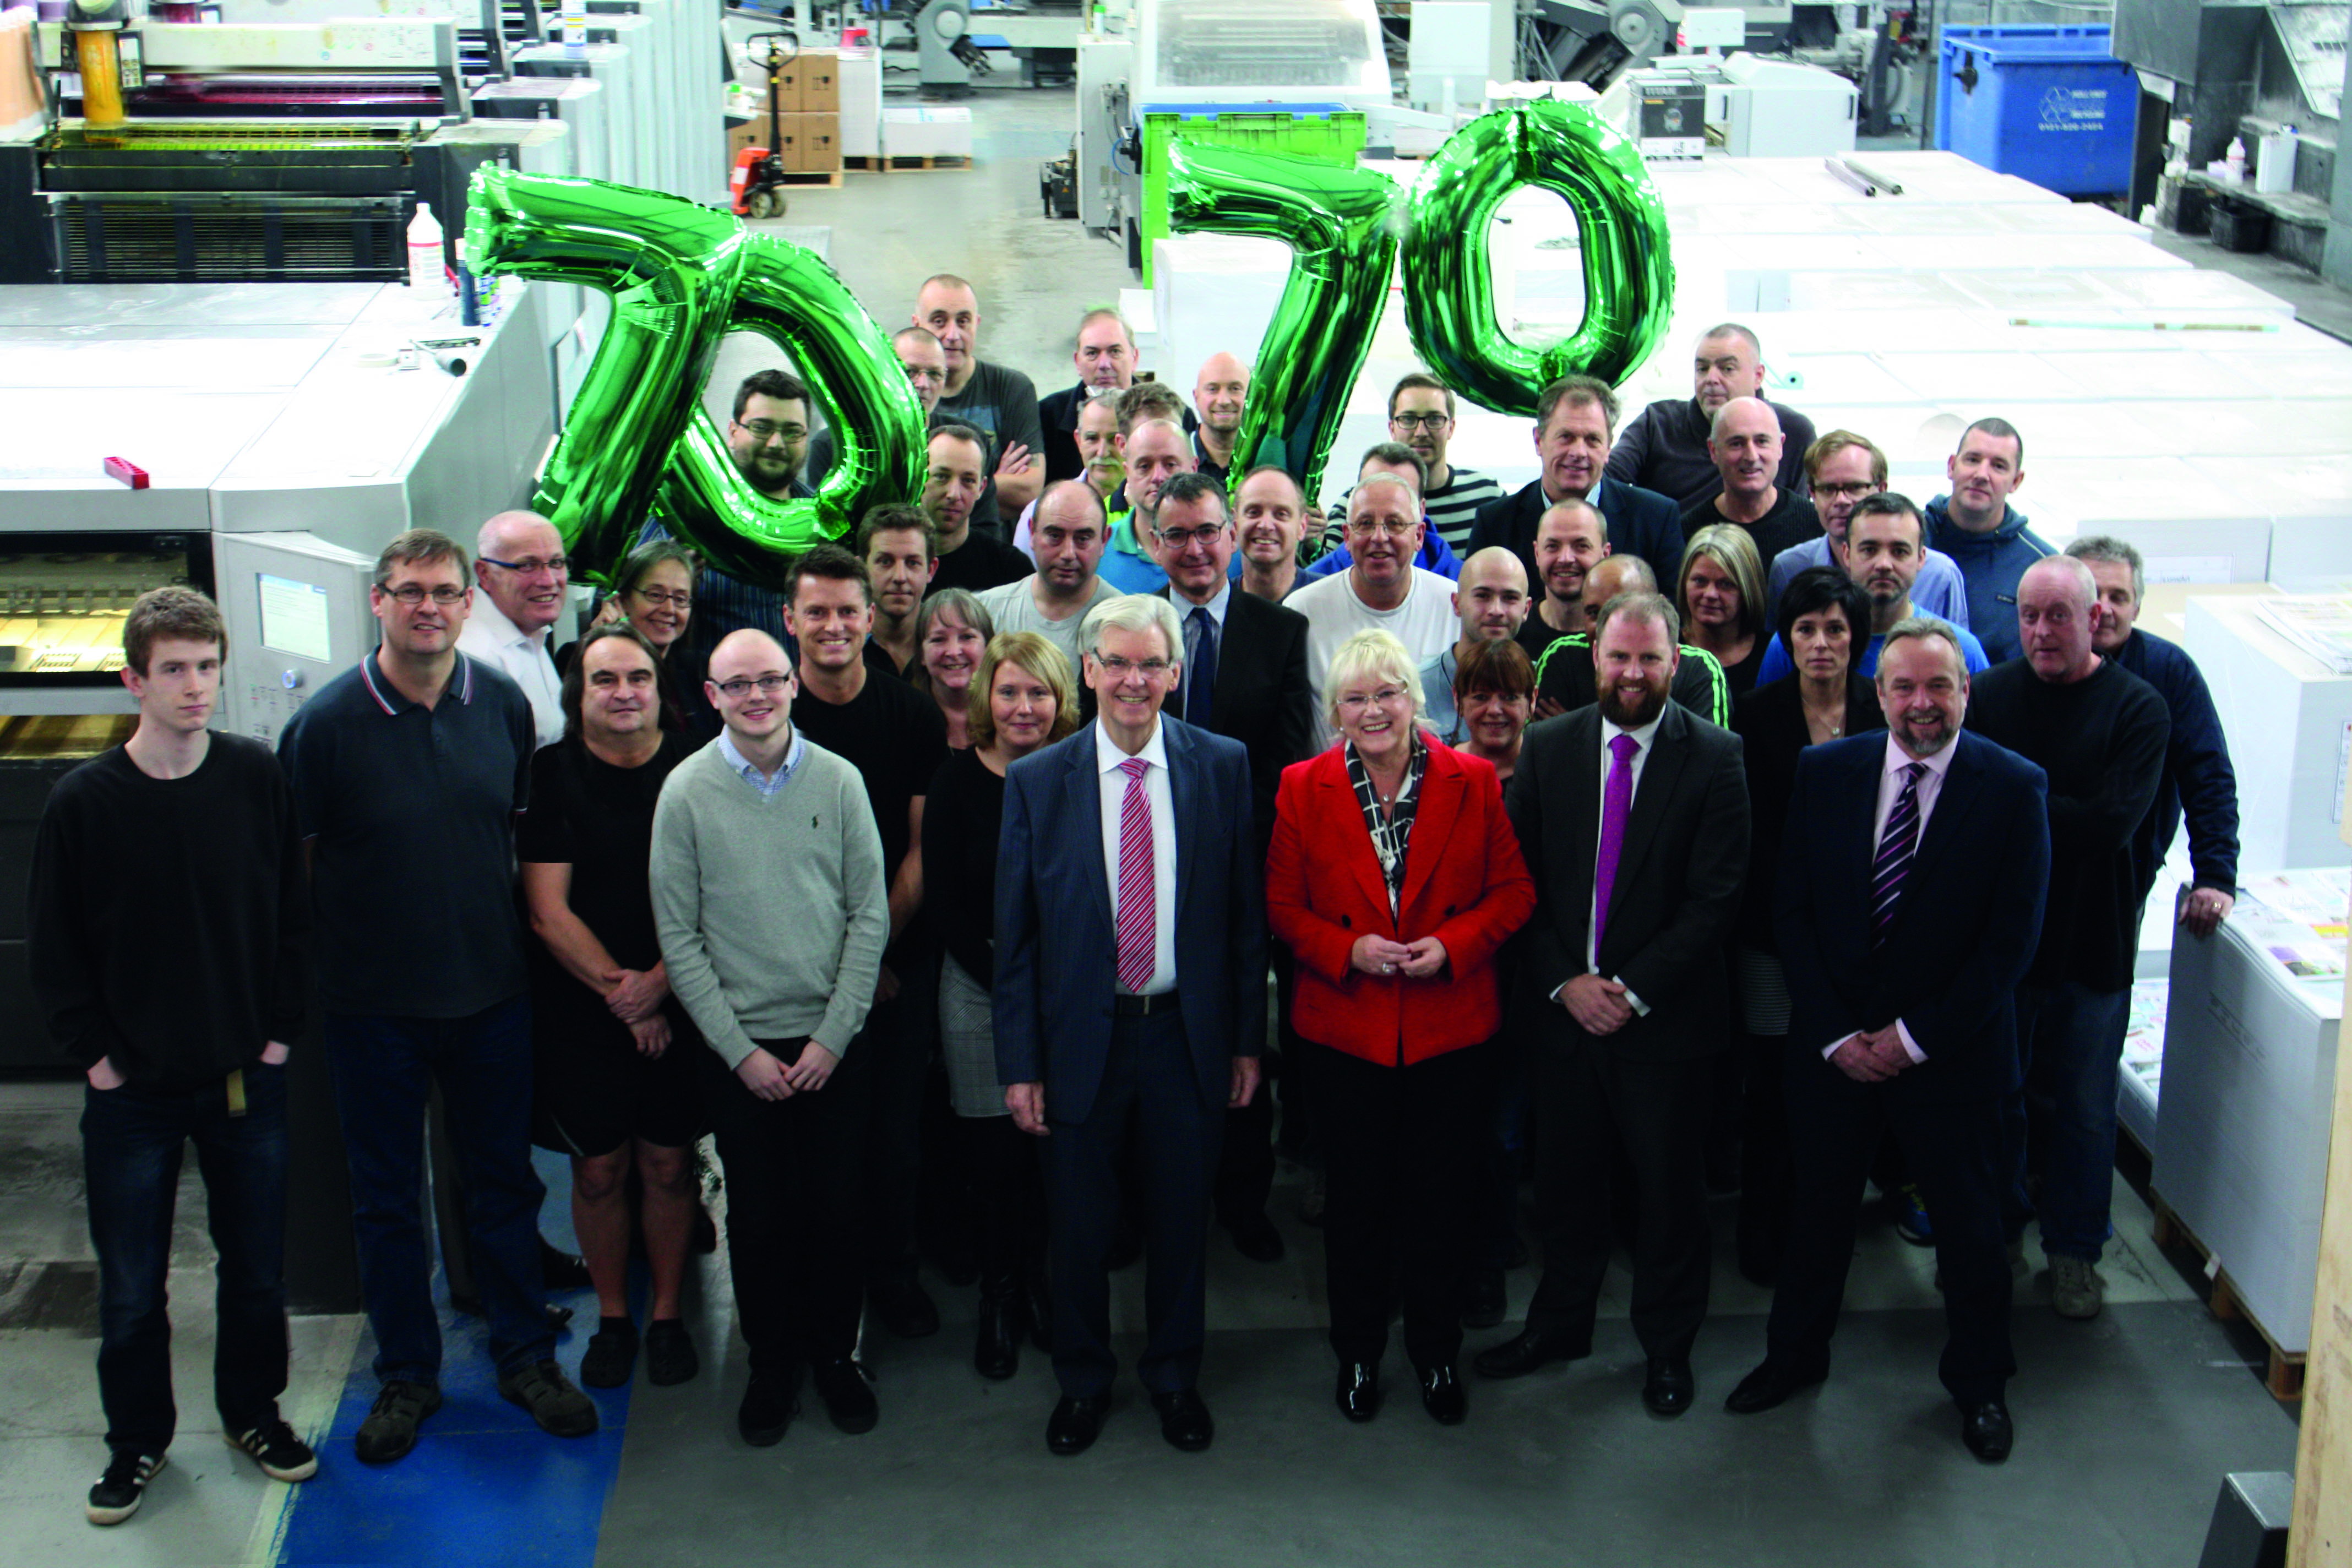 Warwick Printing Company: 70 Years of delivering quality printing